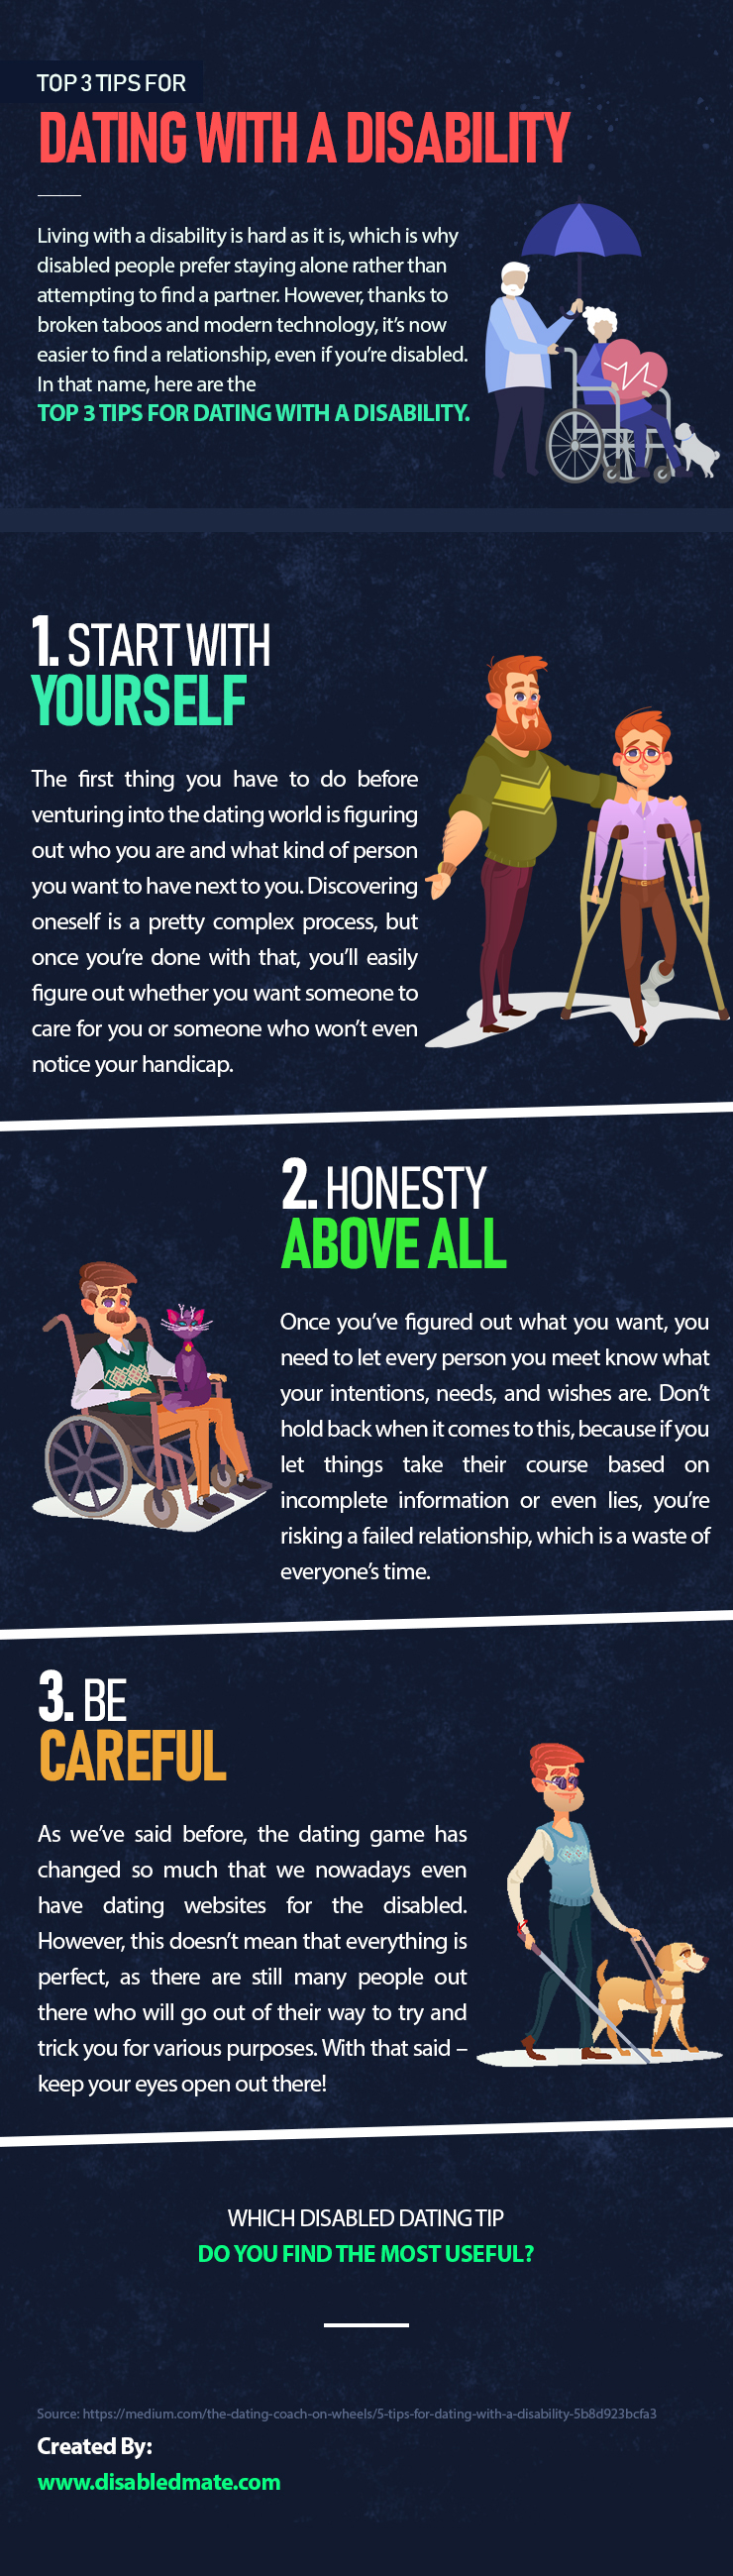 Top 3 Tips for Dating with a Disability